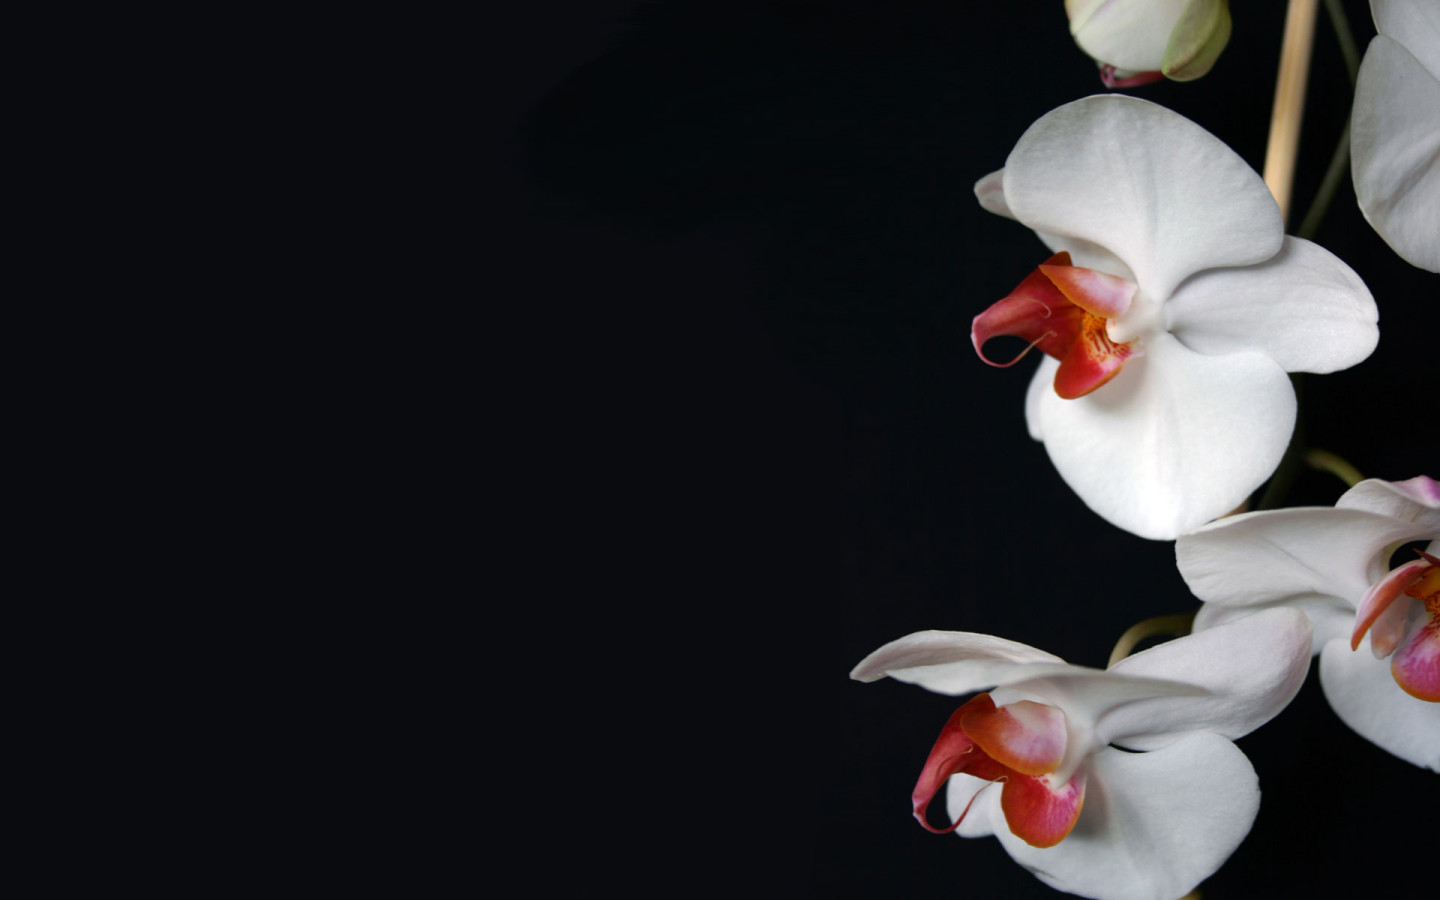 Previous, Nature - Flowers - White Orchid, Flowers wallpaper